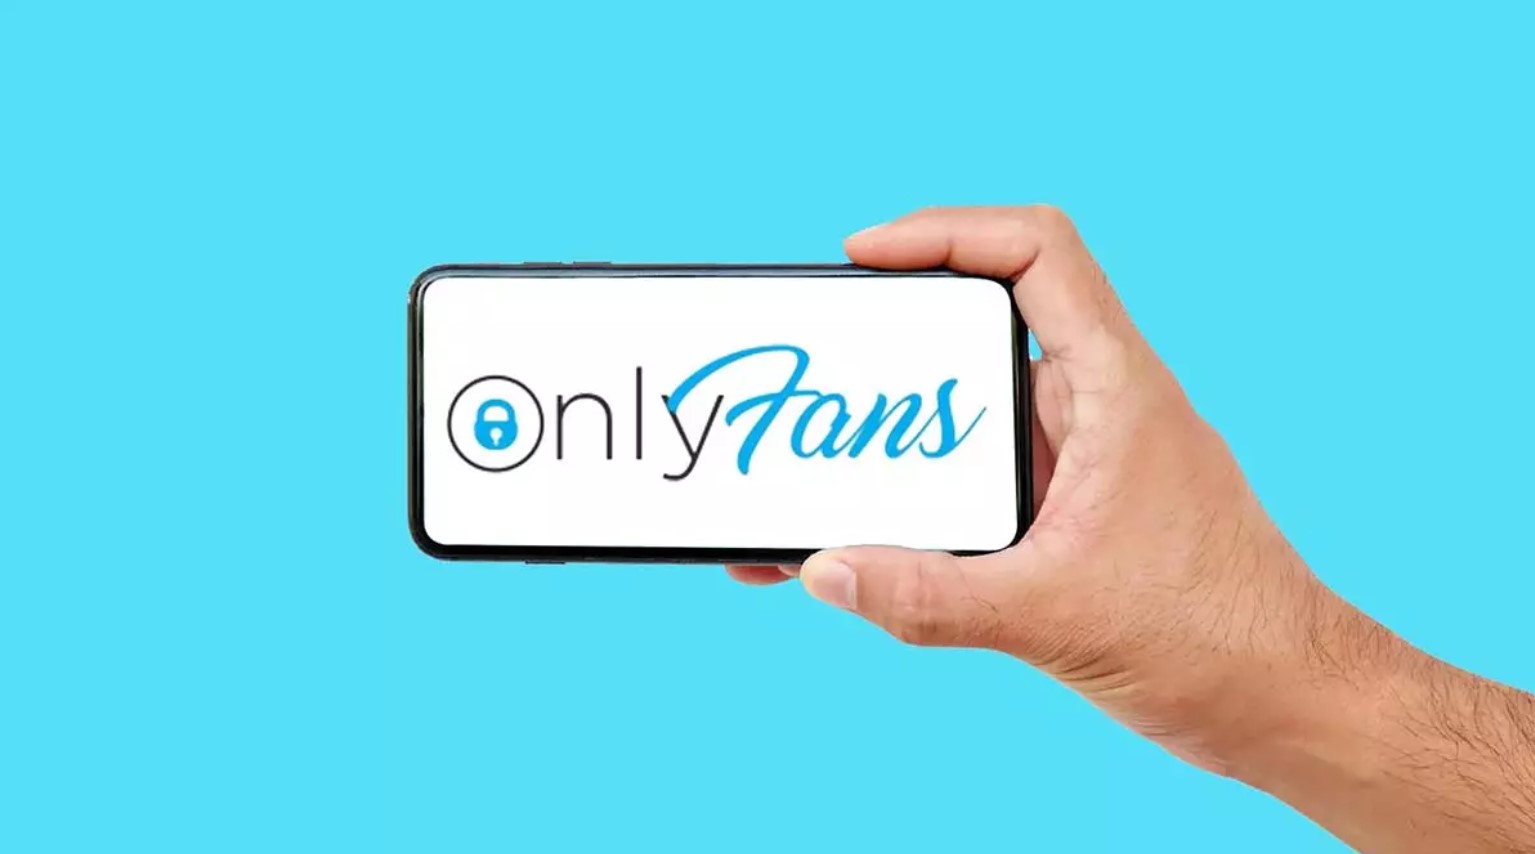 HOW DOES THE ONLYFANS PAYMENT SYSTEM WORK?